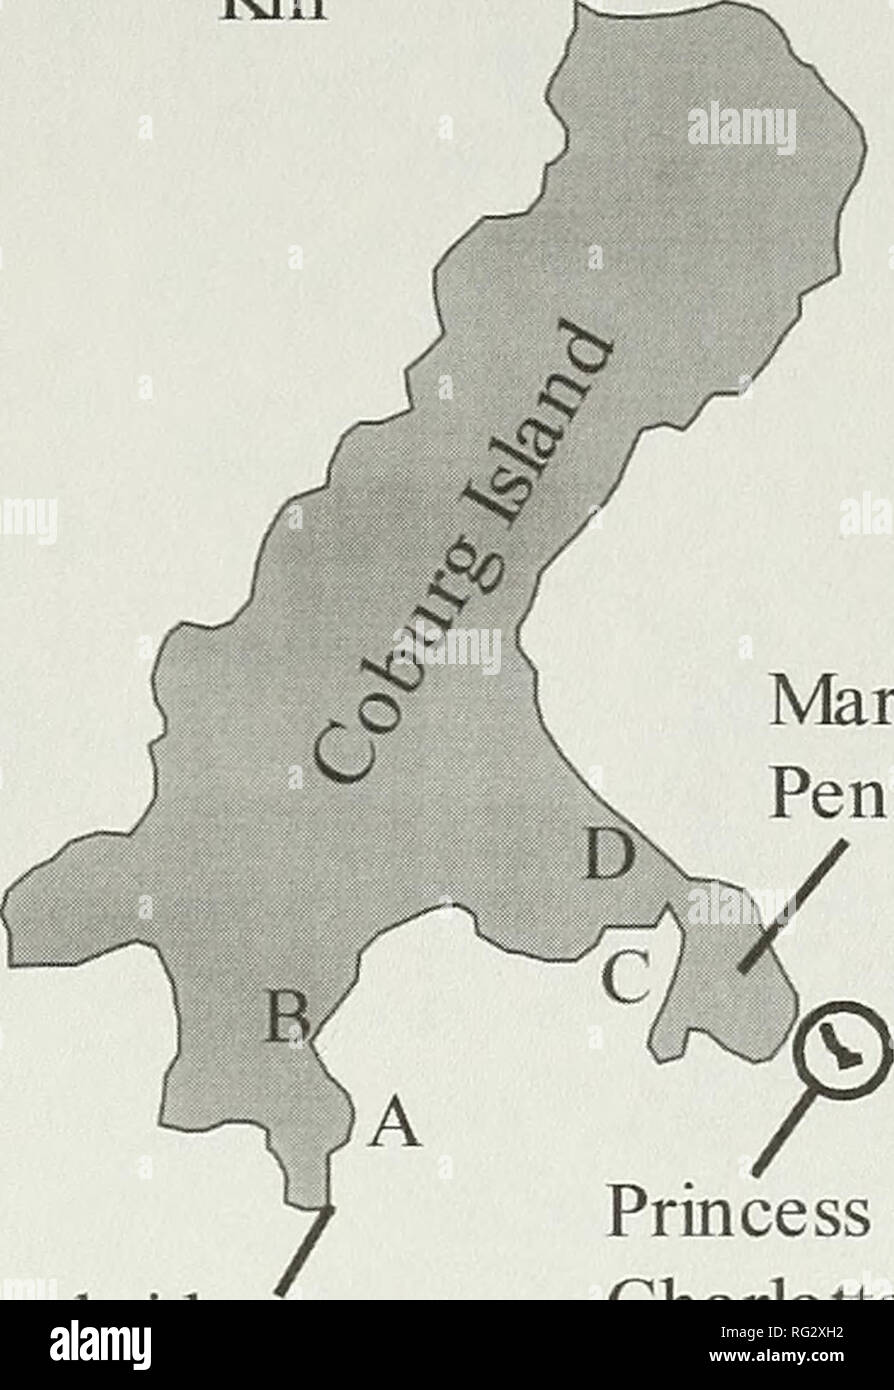 . The Canadian field-naturalist. Figure 1. Map showing Coburg Island, the Northwater Polynya (shaded region between Coburg Island and Greenland), and the range of breeding Atlantic Puffin colonies for both F. a. arctica and F. a. nau- 0 5 10 UujJ I Km. Marina Peninsula Cambridge Point Princess Charlotte Monument Figure 2. Area map of Coburg Island. Annotated locations refer to, (A) main colony; (B) Camp Beach, (C) Epic Bay; and (D) Cabin Beach. format black-and-white film, which is now archived at the Canadian Wildlife Service, Yellowknife, Northwest Territories, Canada. We report only on bird Stock Photo